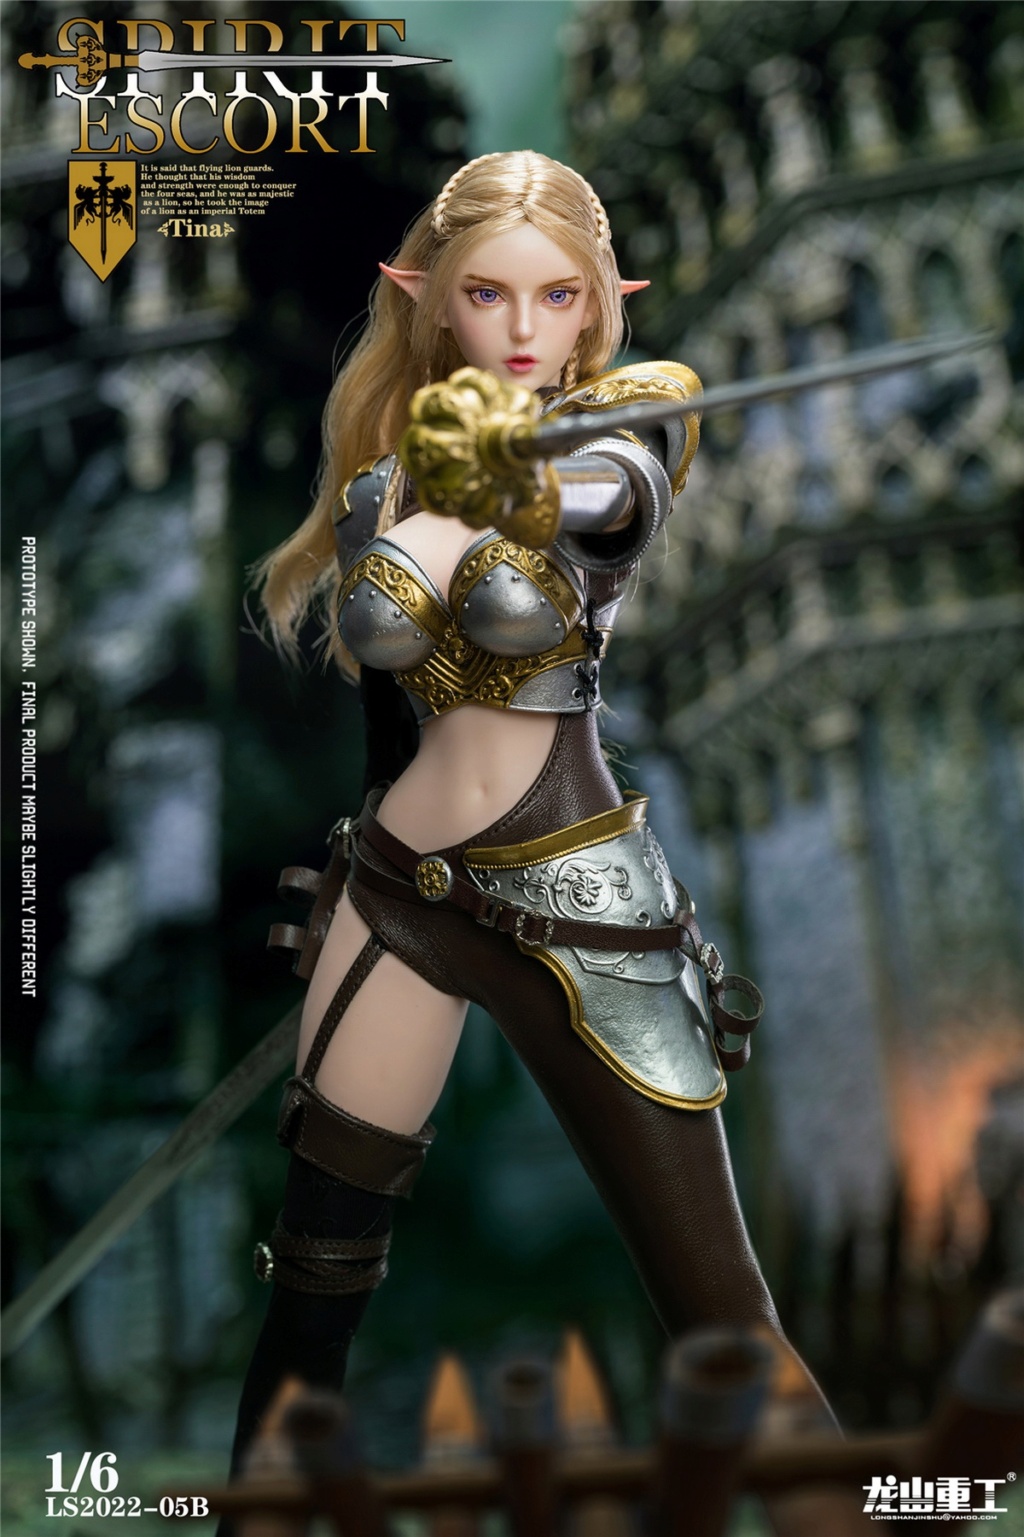 Anna - NEW PRODUCT: Longshan Heavy Industry: 1/6 Elf Guard Series First Shot - Anna & Tina Action Figure #SL2022-05 17400212